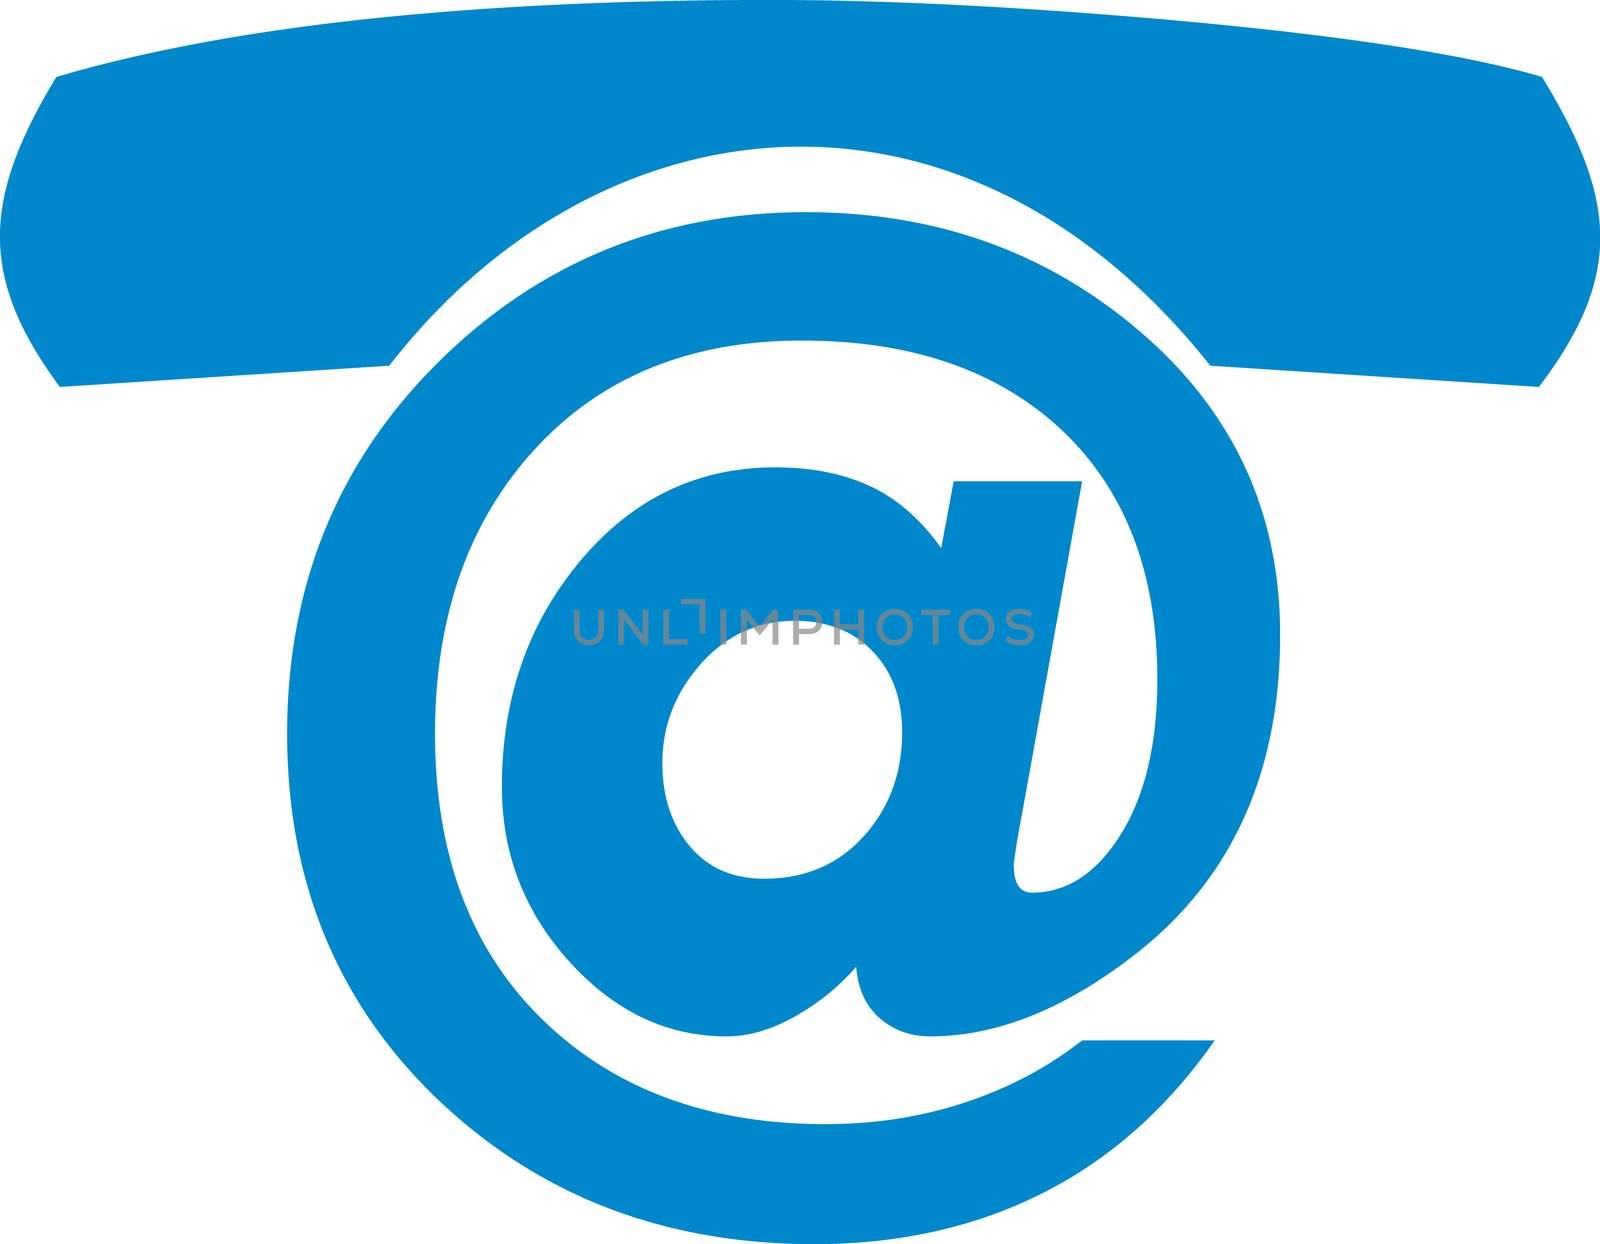 Abstract vector illustration of e-mail